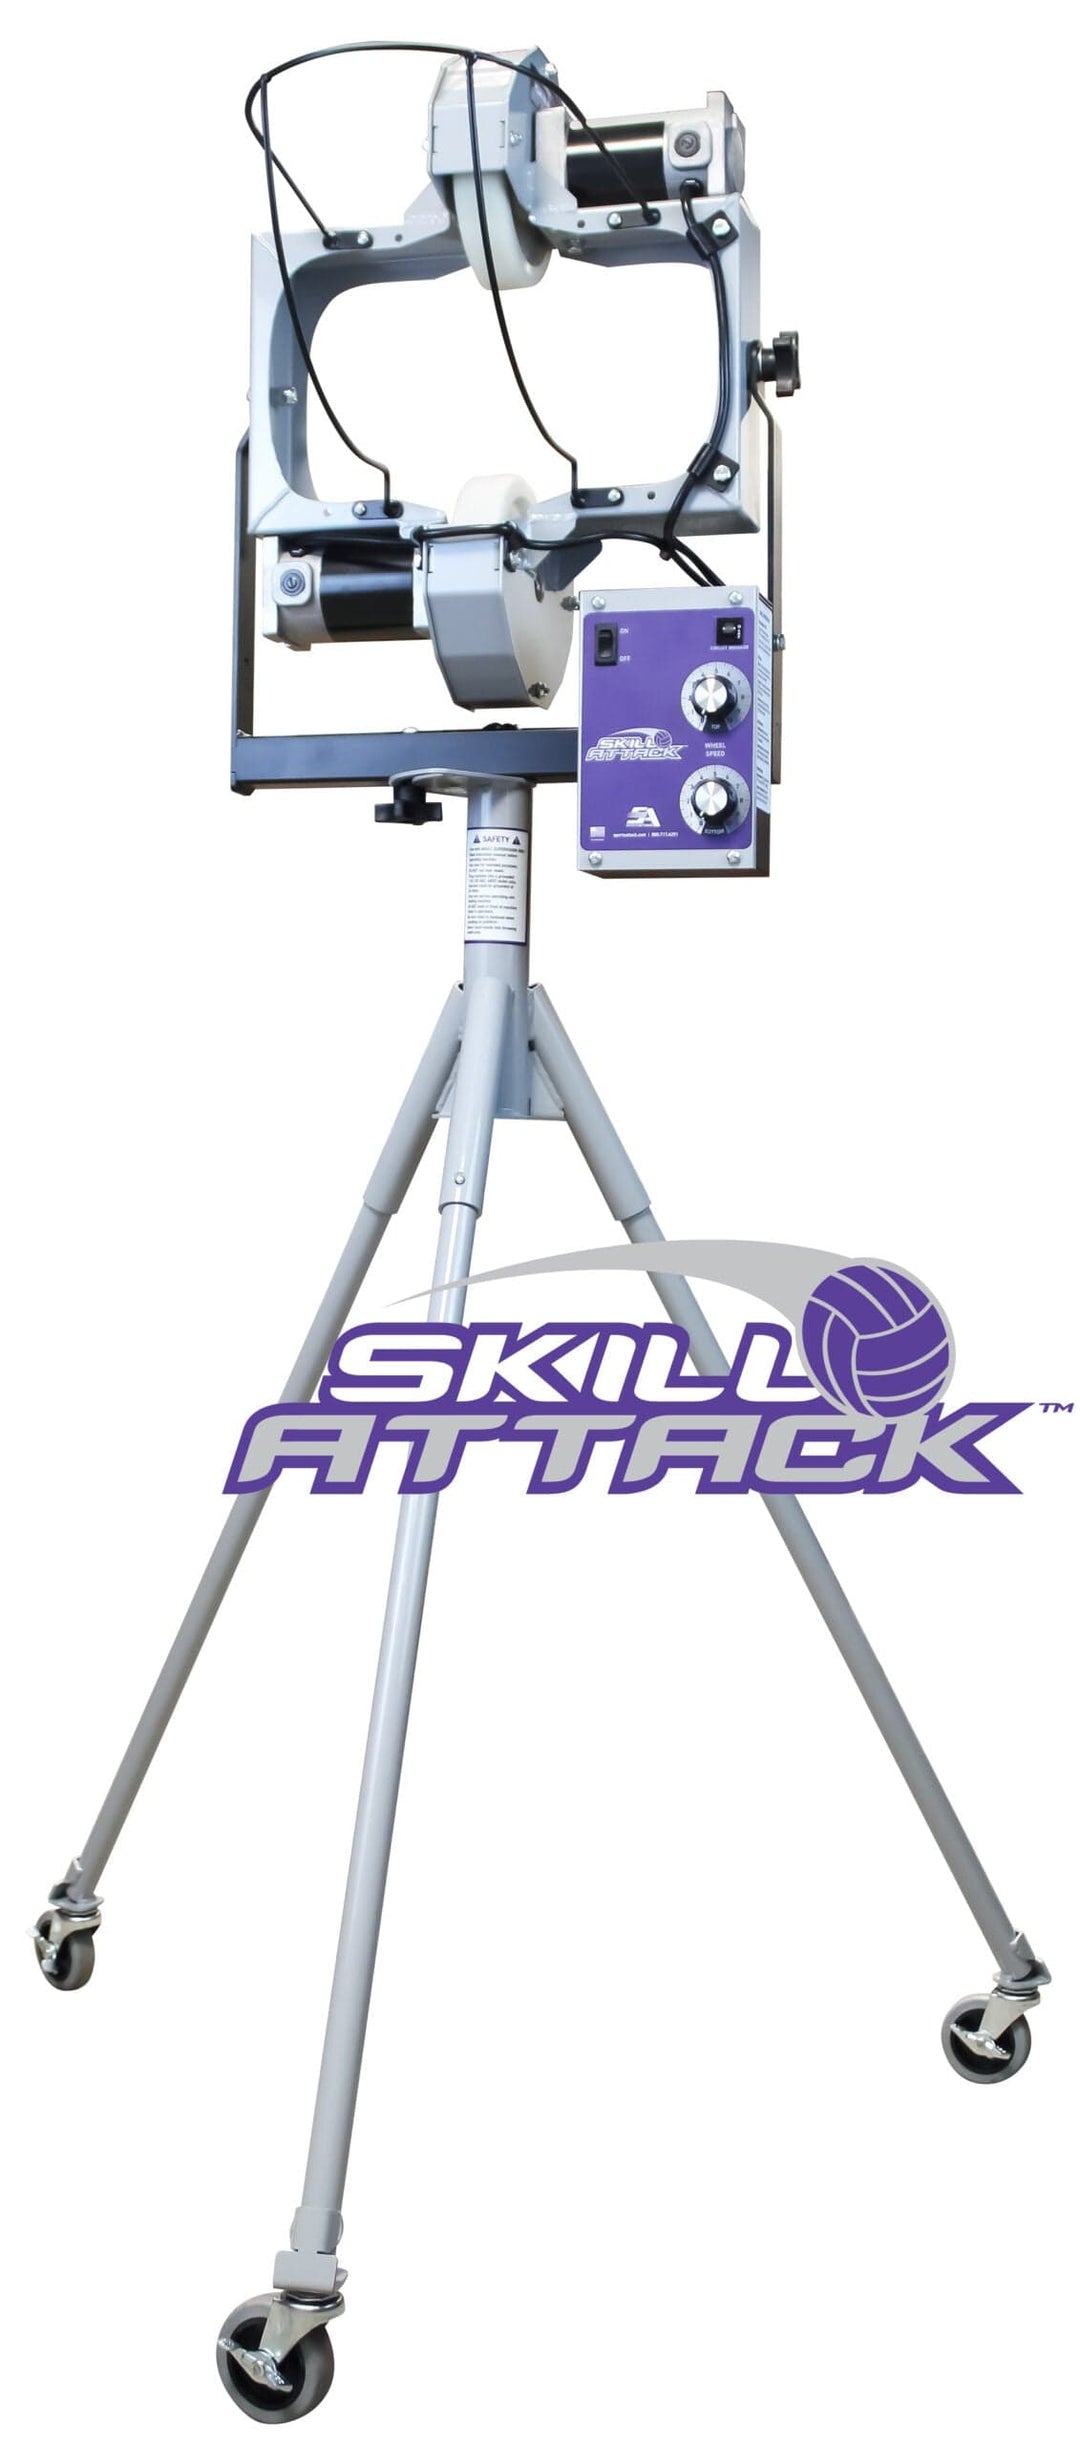 Sports Attack Machines and Accessories Skill Attack Volleyball Machine | Sports Attack